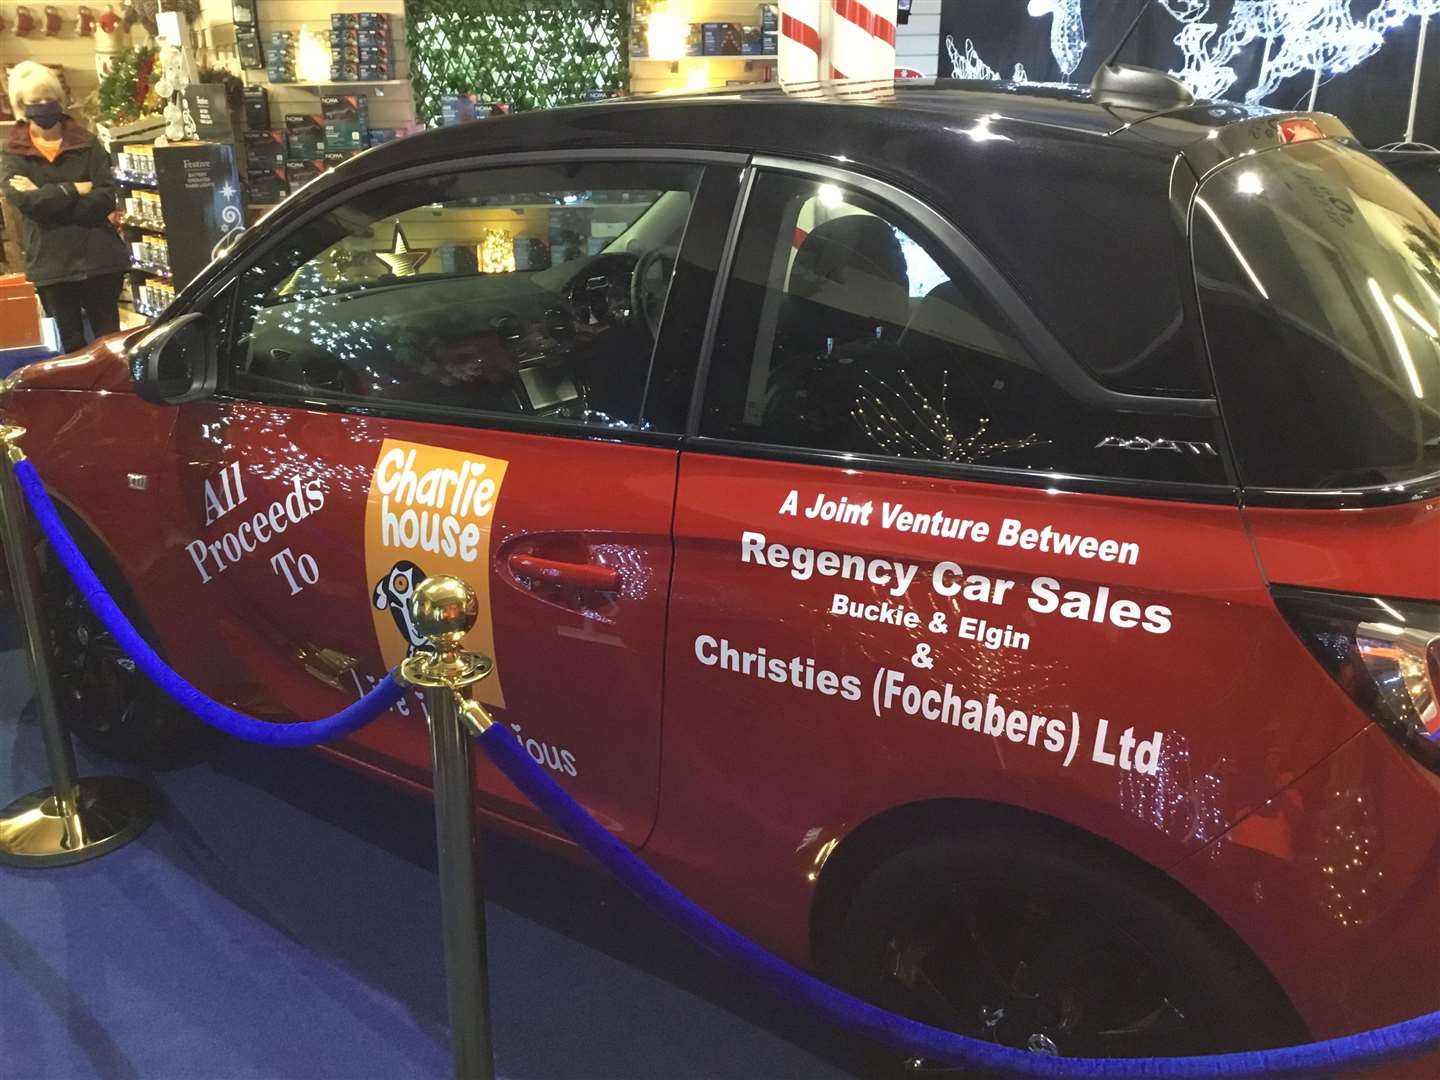 A competition has been launched at Christies Garden Centre in Fochabers to win a new Vauxhall Adam car.